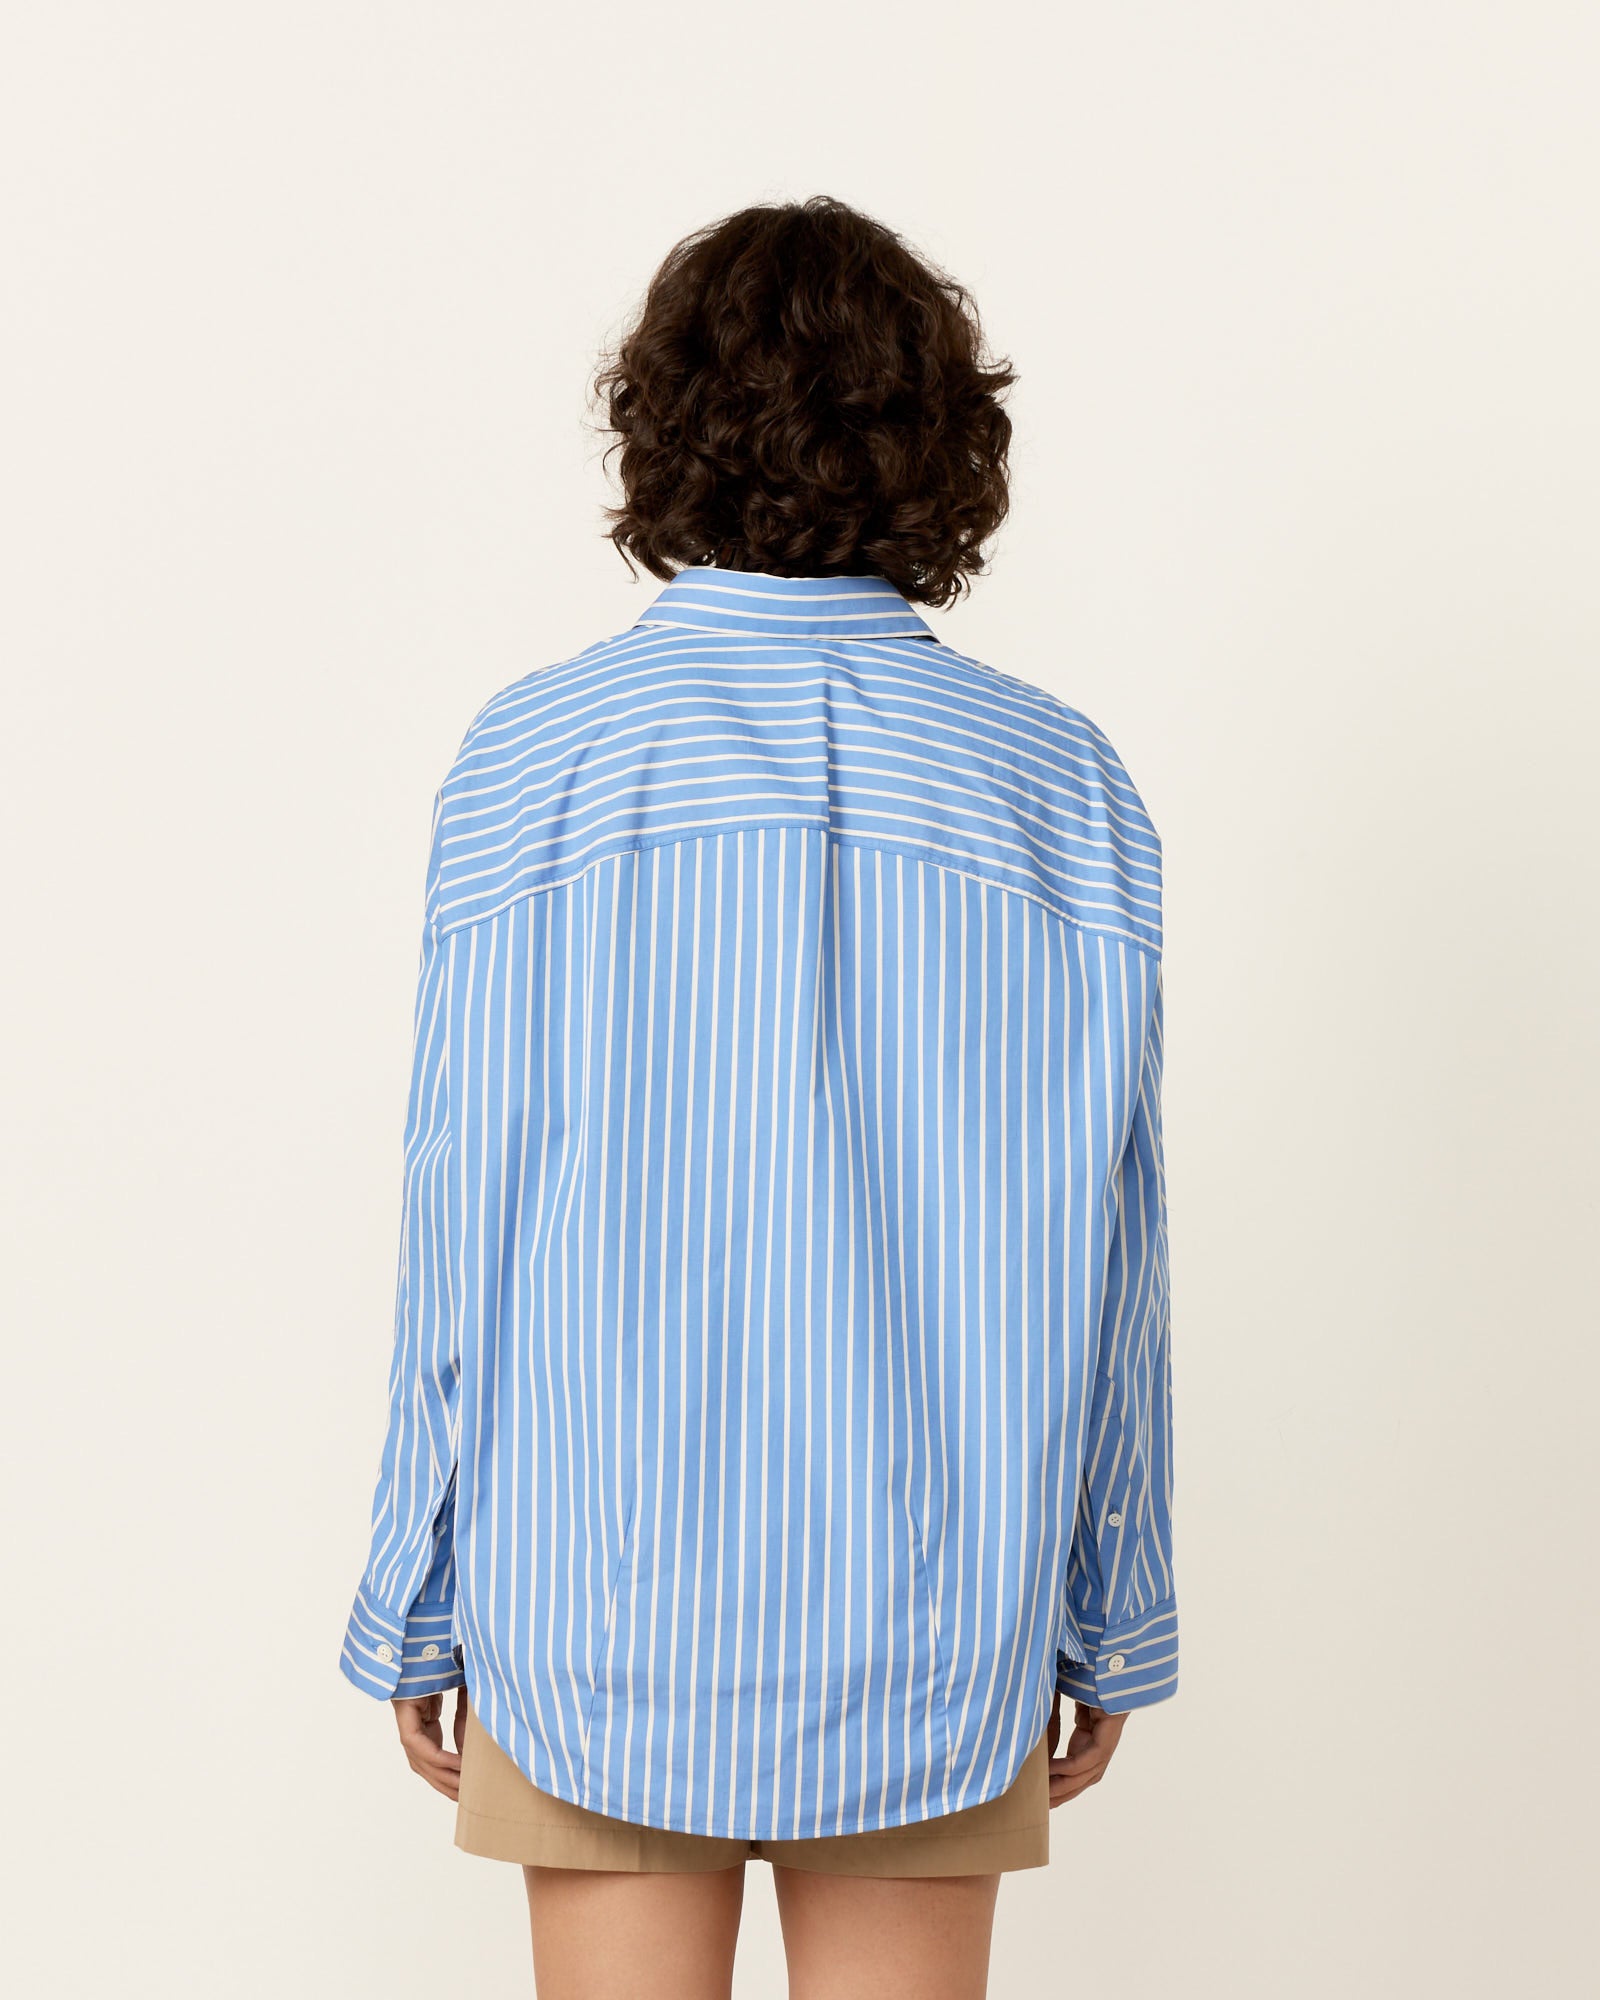 Cocoon Shirt in Light Blue